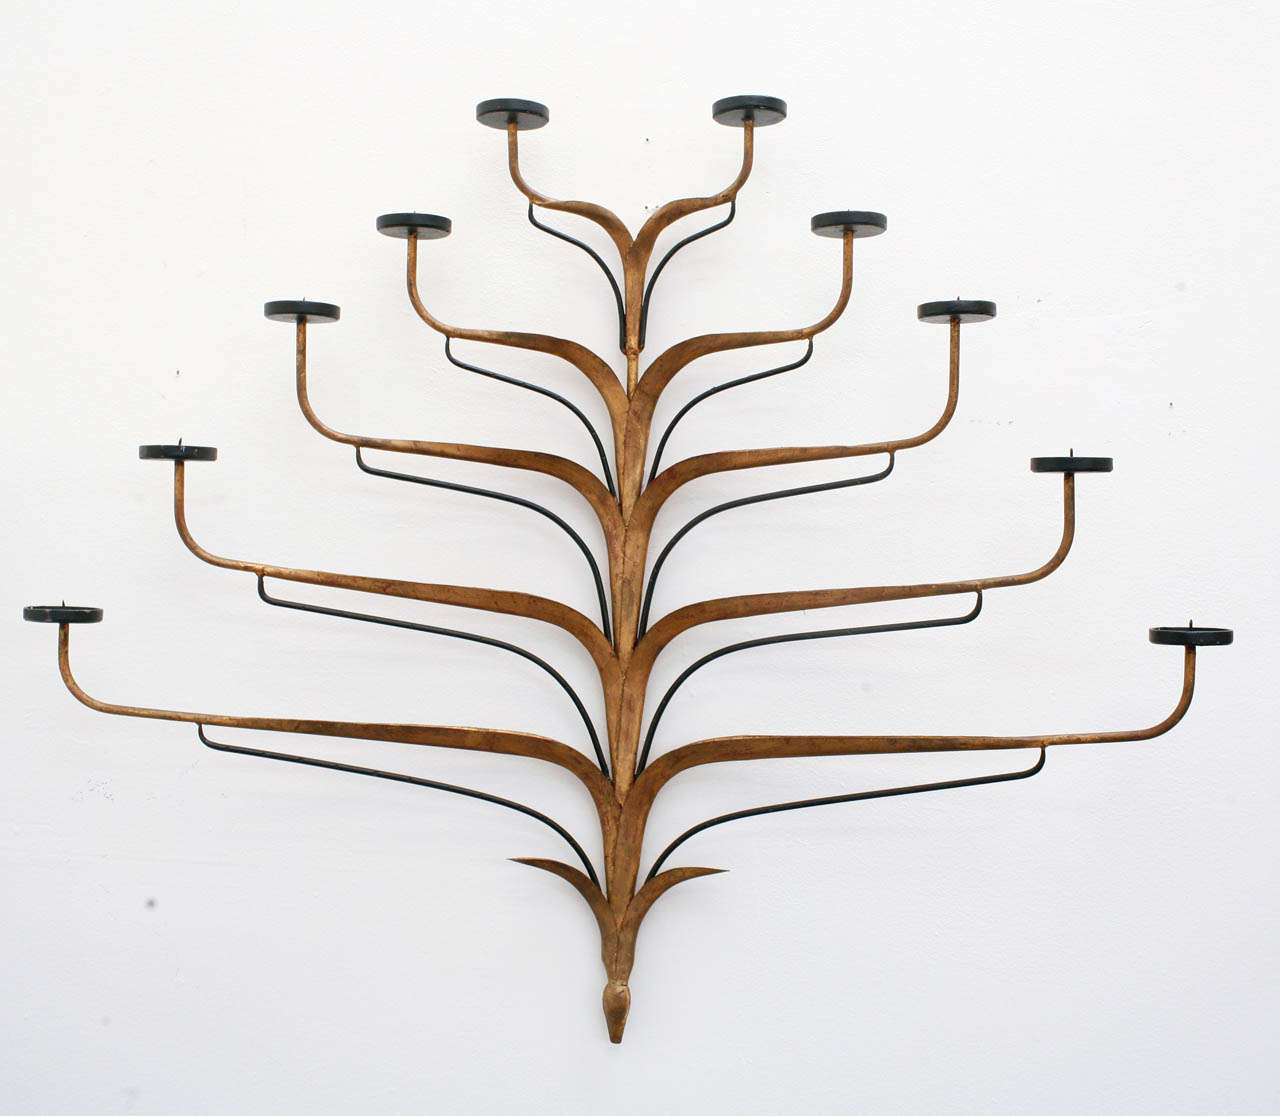 This incredible wall-mounted candelabra is truly more of a sculpture than anything else. Featuring ten undulating arms with recessed ends meant for tea lights, this metal Italian candelabra has a bronze patina and black details. Truly beautiful and